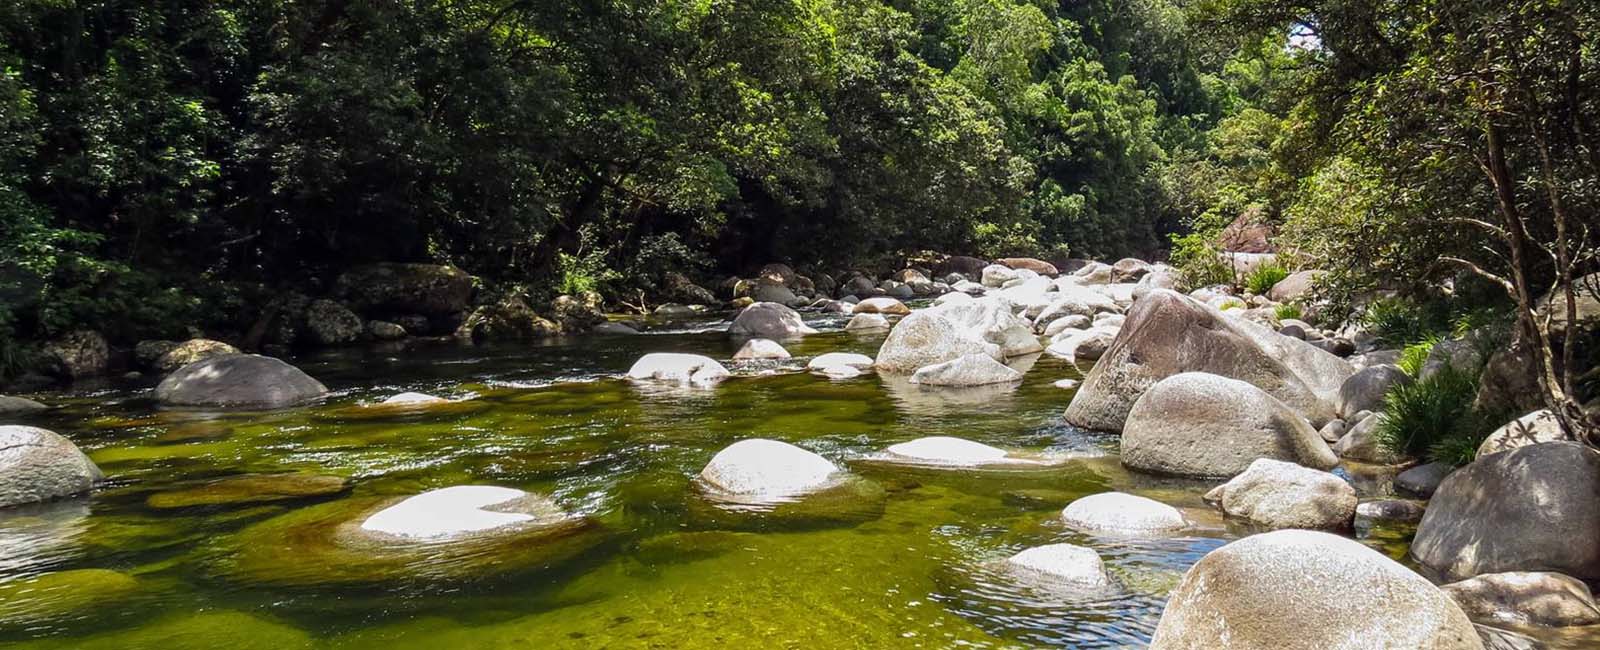 Large white boulders in a creek in the rainforest (Mossman Gorge) 